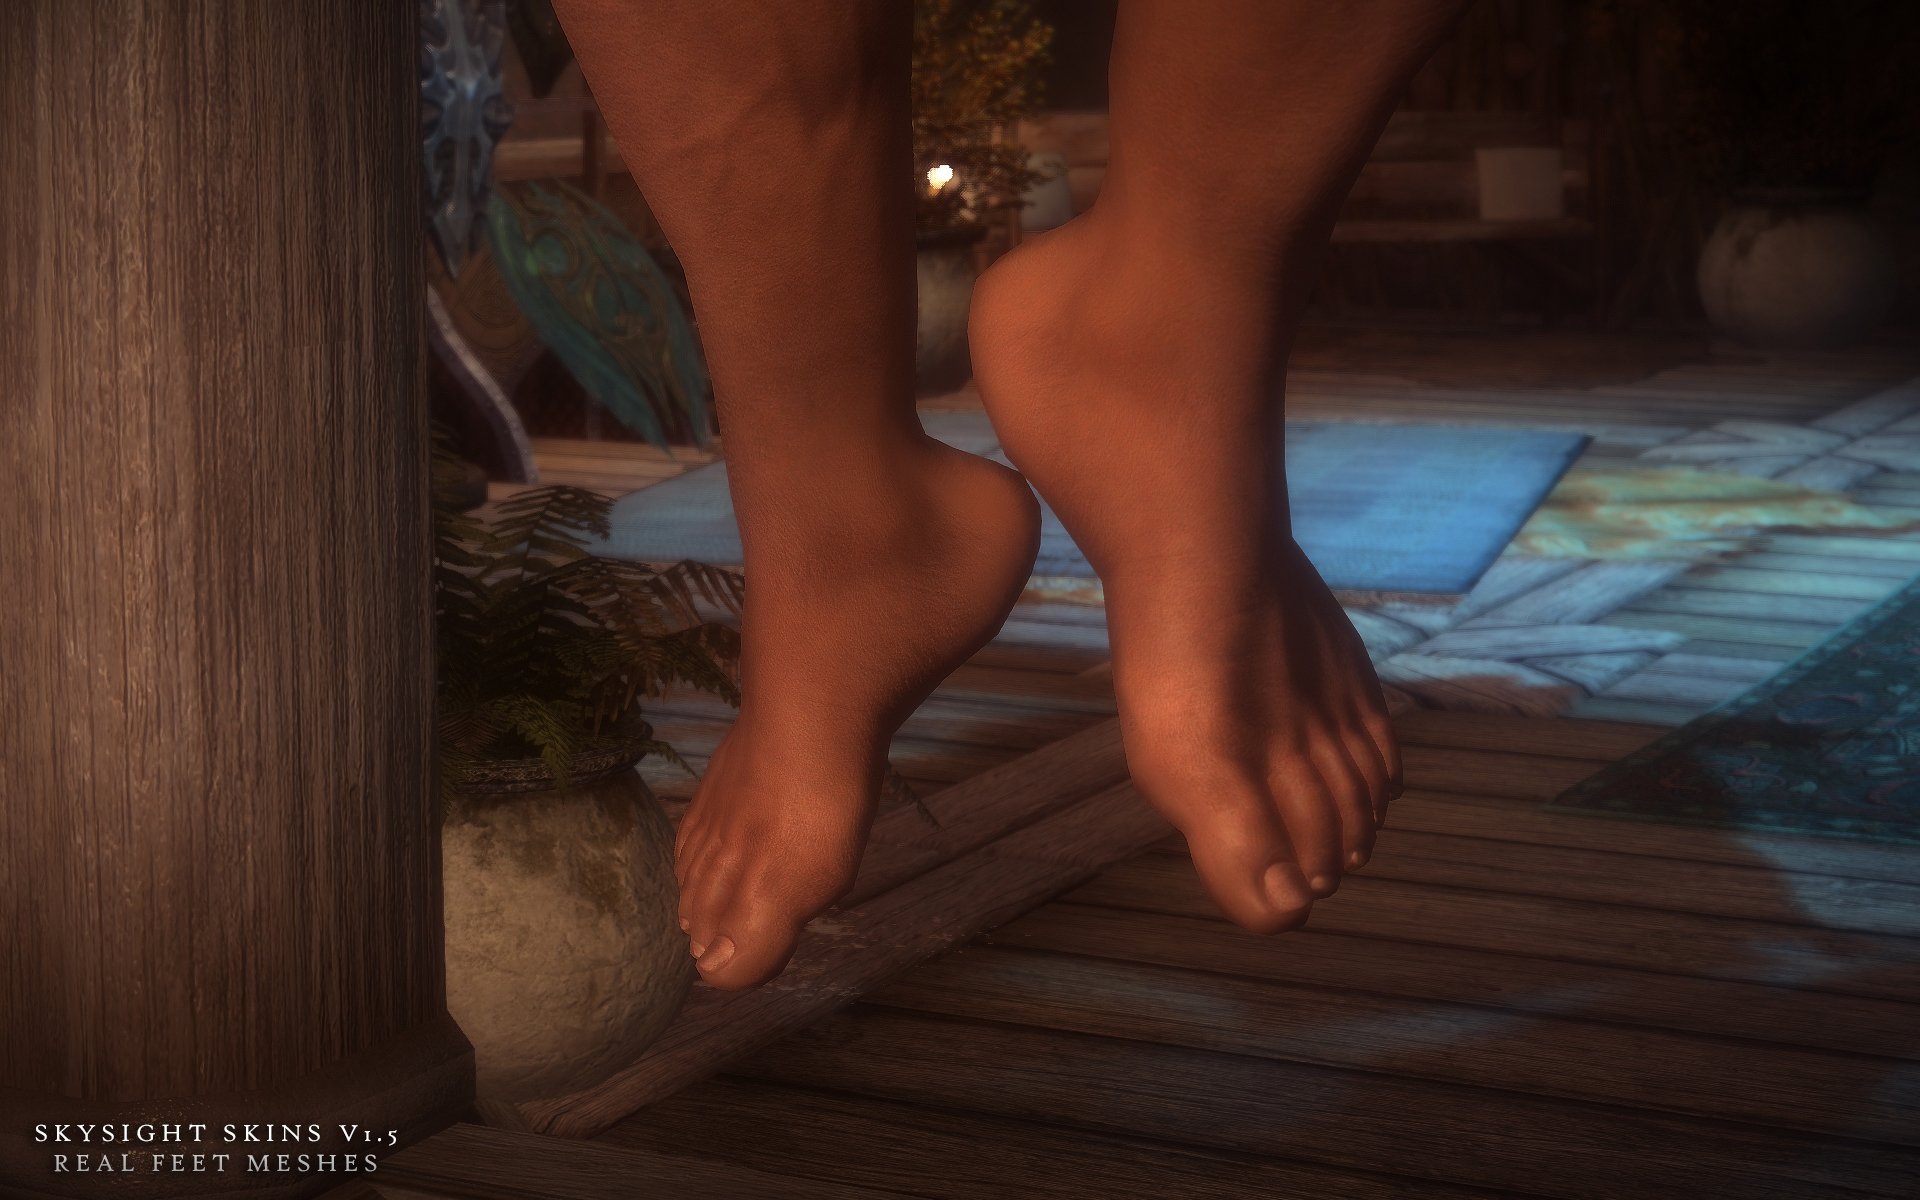 SkySight Skins - Ultra HD 4K 2K Male Textures and Real Feet Meshes миниатюр...